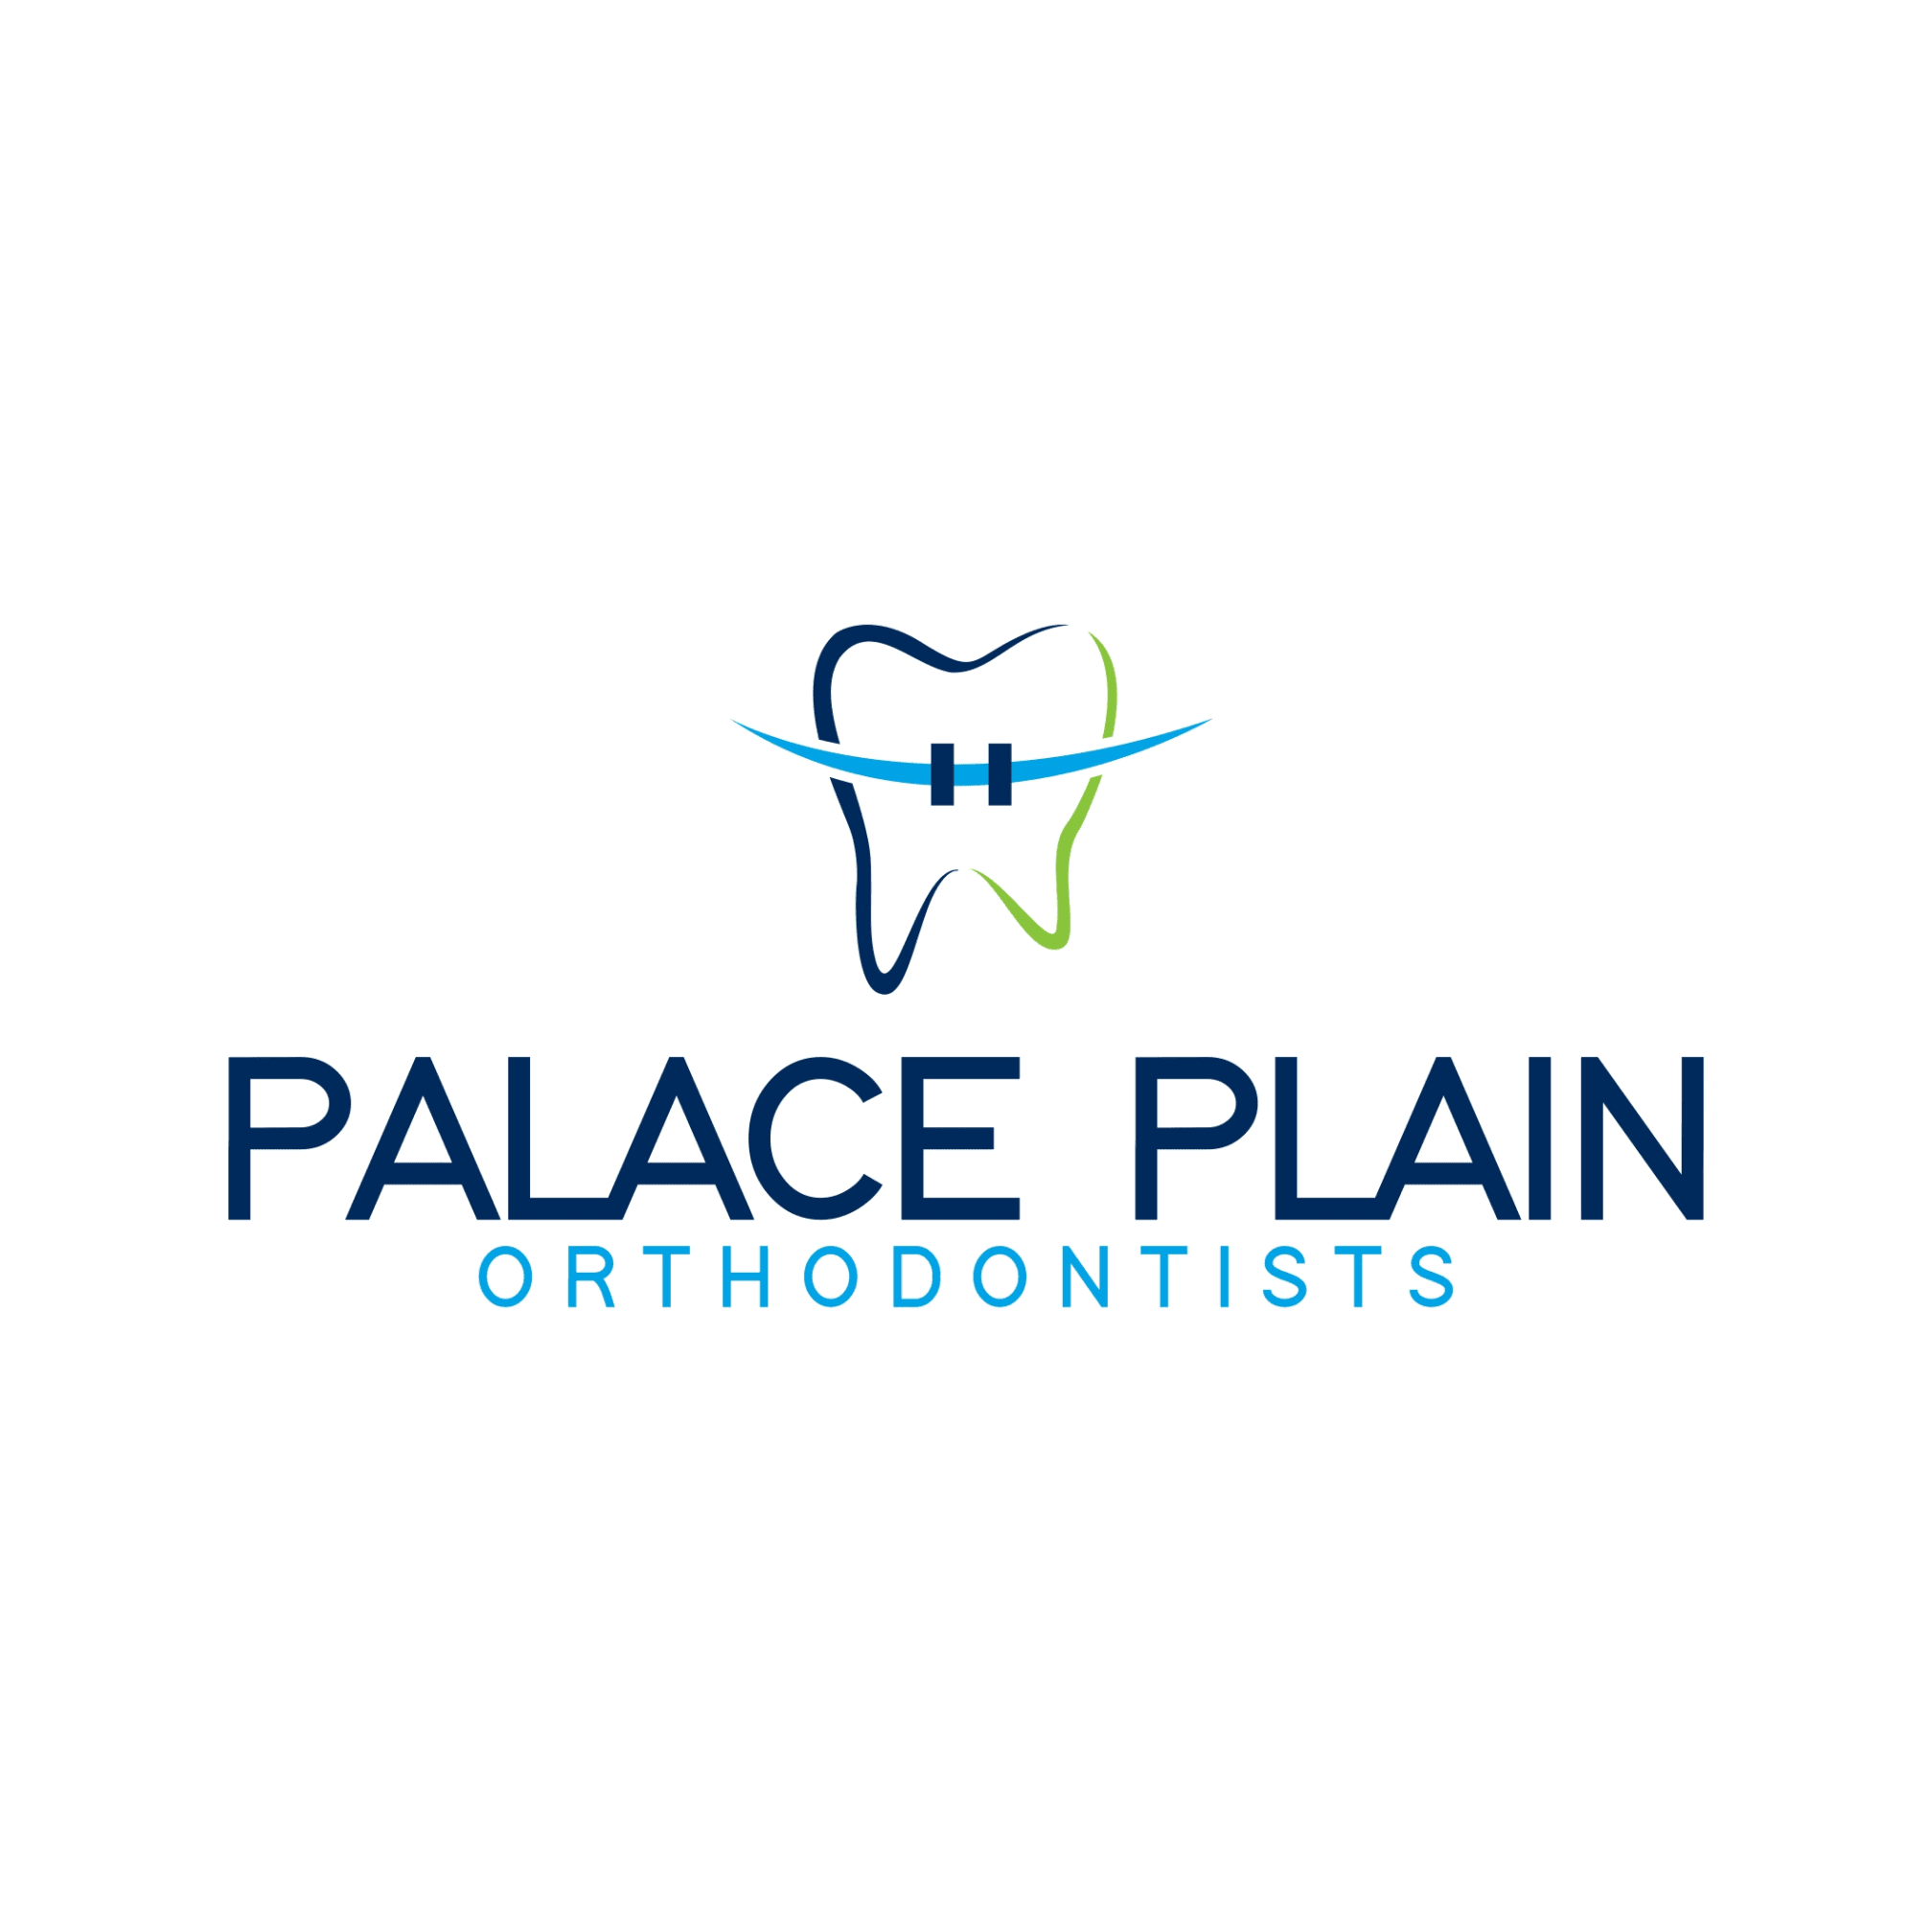 Palace Plain Orthodontic Practice - Norwich, Norfolk NR3 1RN - 01603 610067 | ShowMeLocal.com